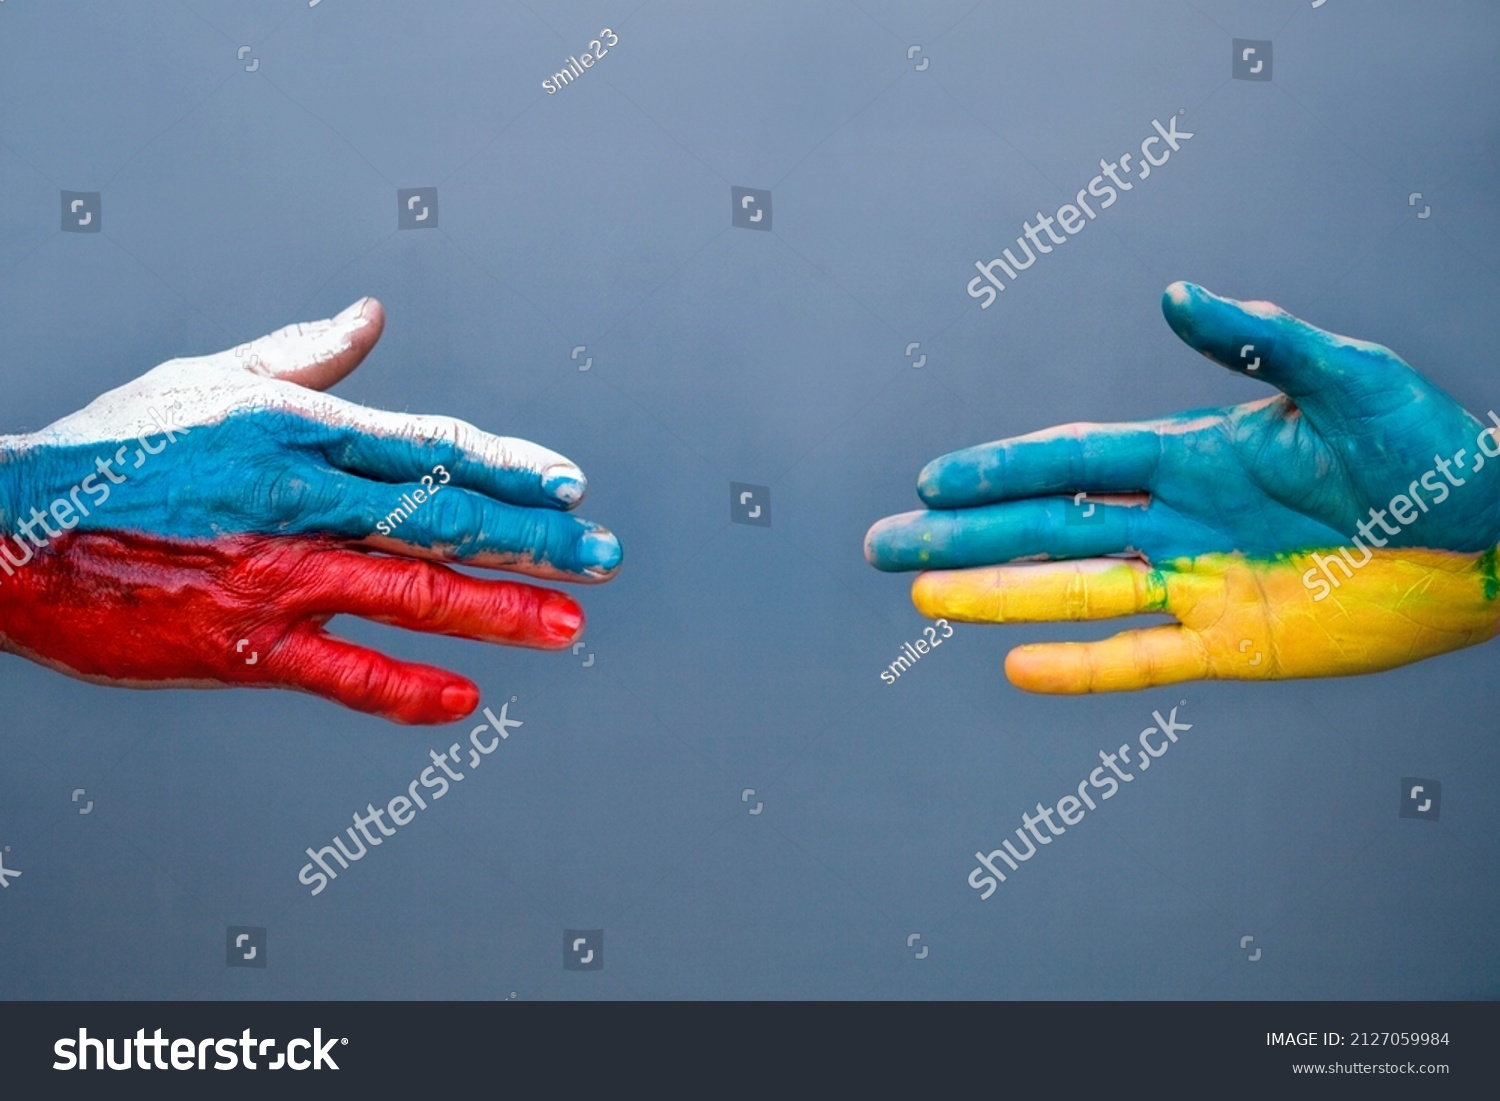 Flags of Ukraine and Russia The flag on the hands move away from each other. Conflict Ukraine vs Russia in World War Crisis Concept #2127059984